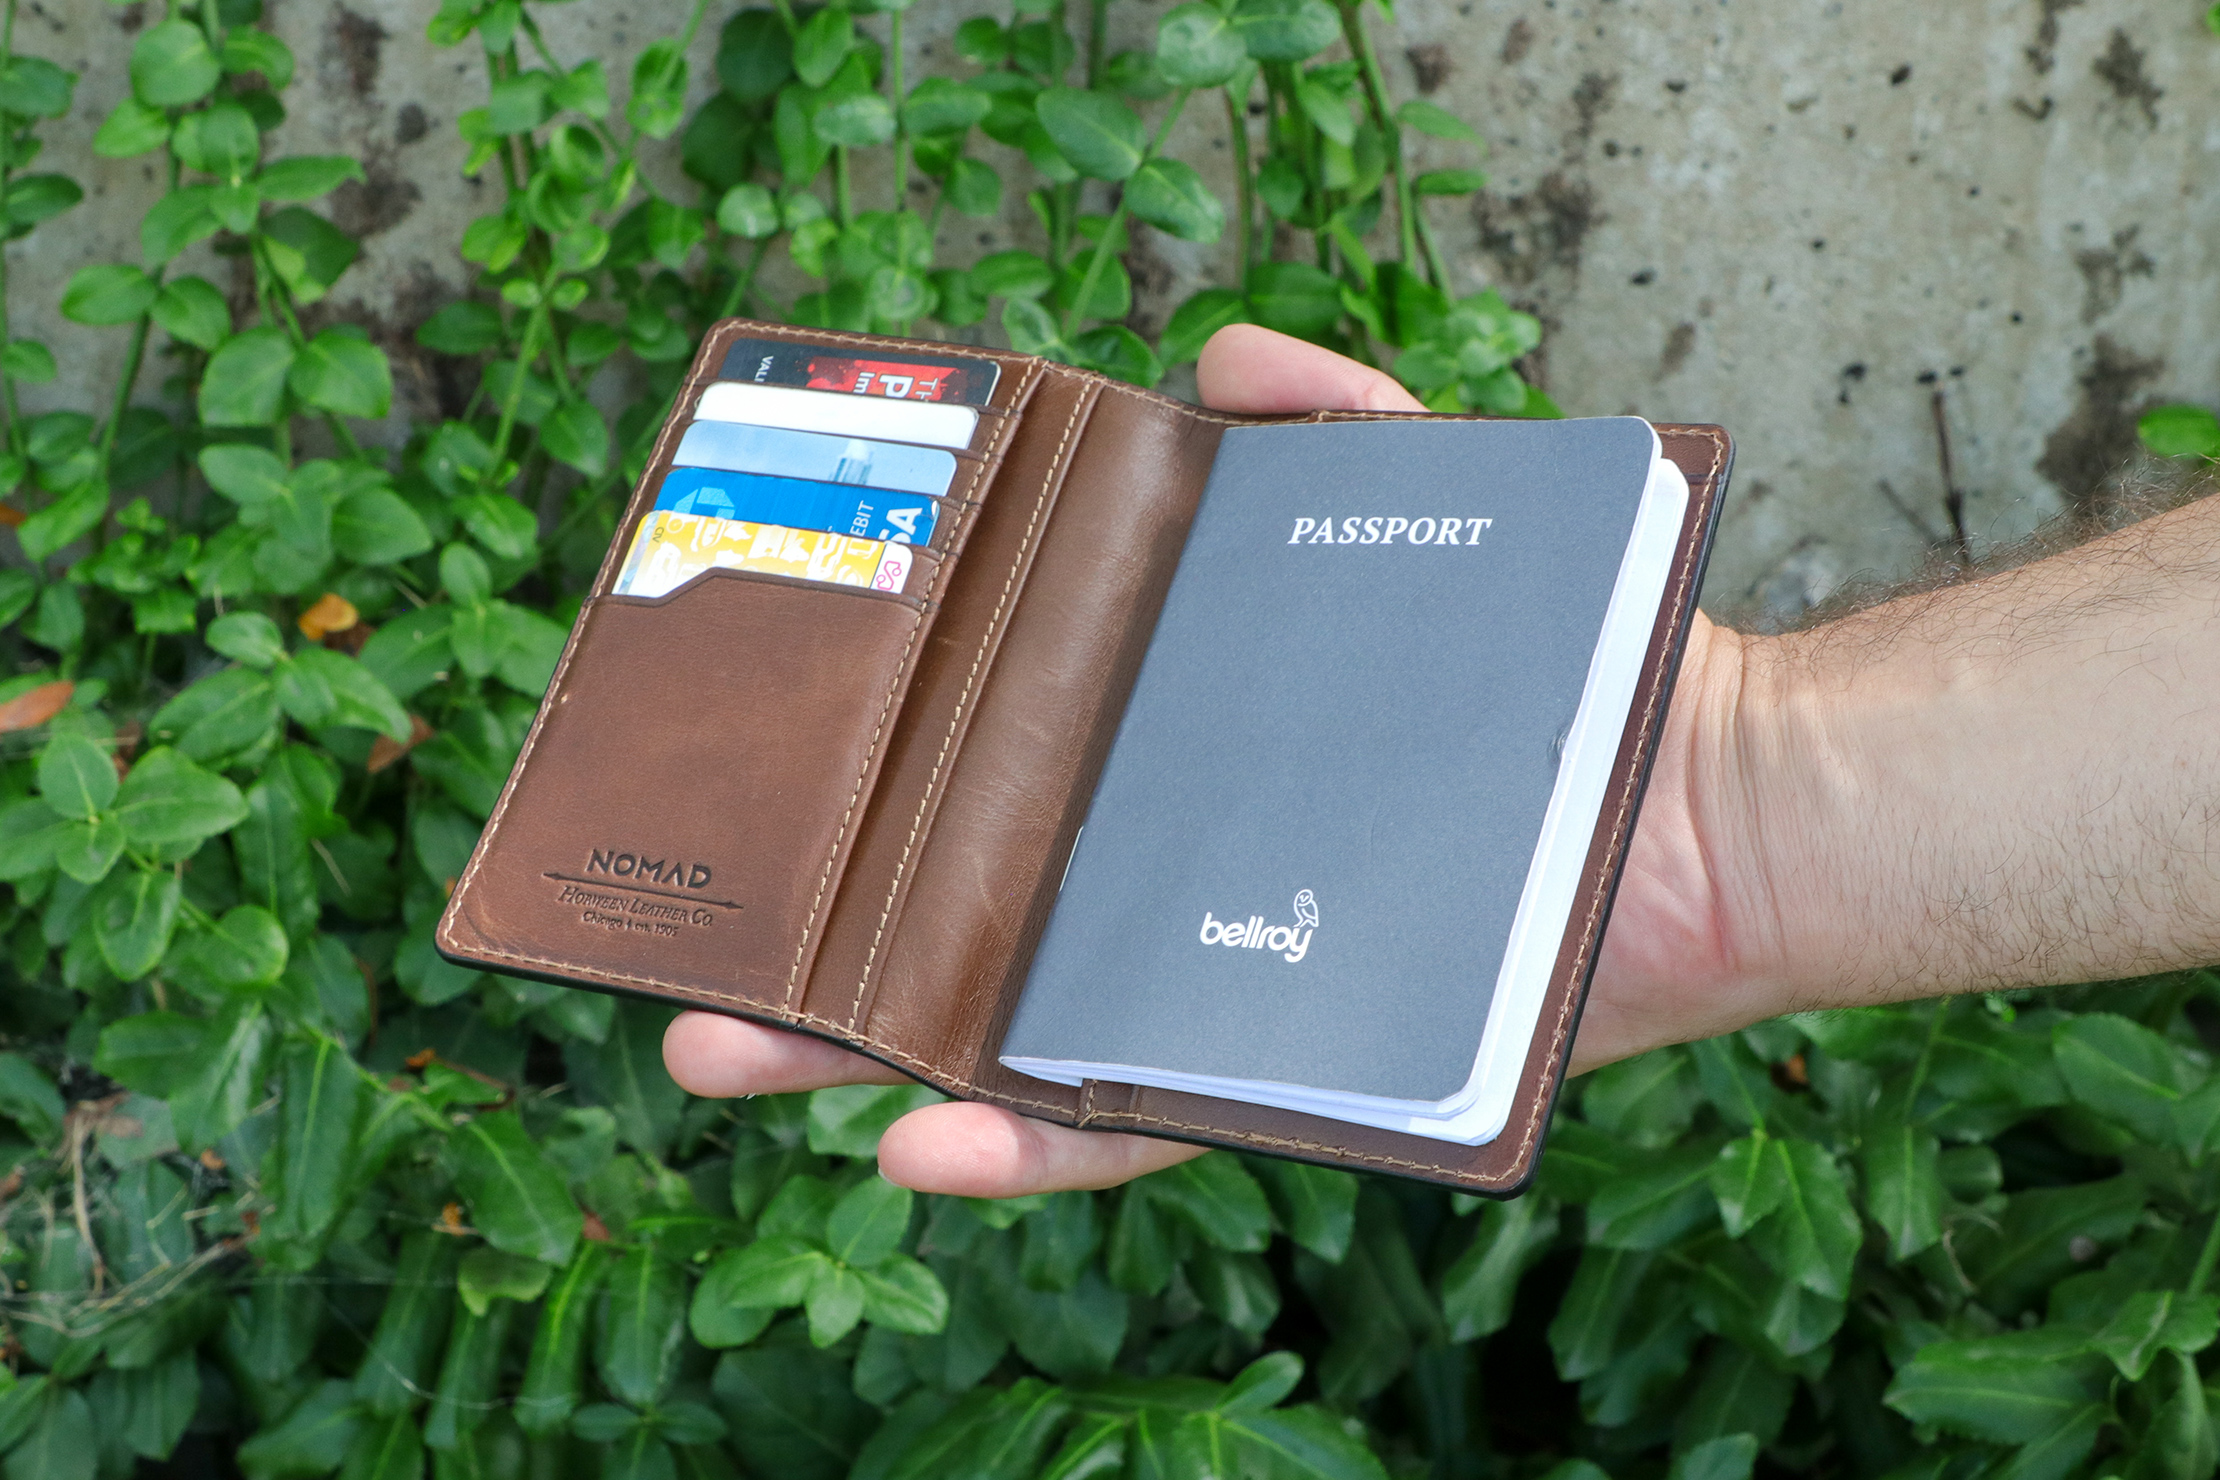 Three New Nomad Leather Wallets Make an Appearance Along with a